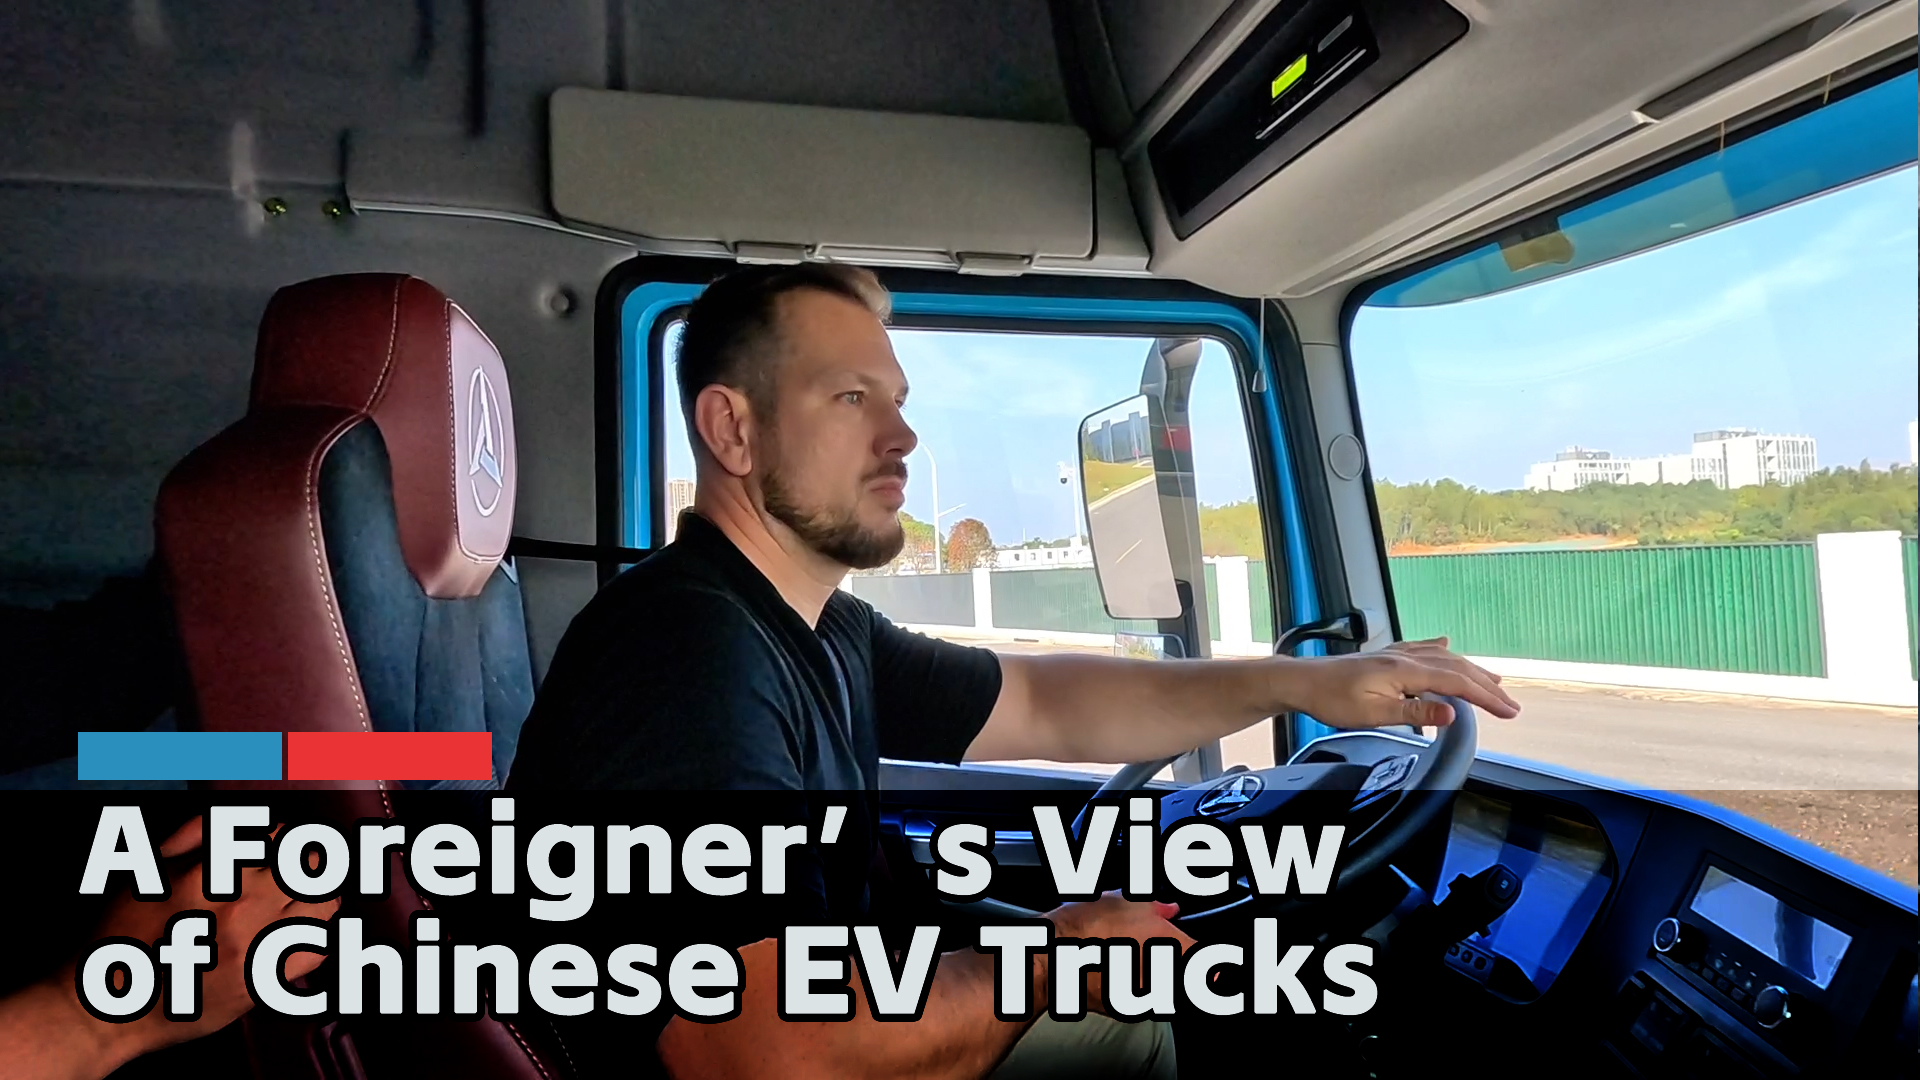 A Foreigner's View of Chinese EV Trucks